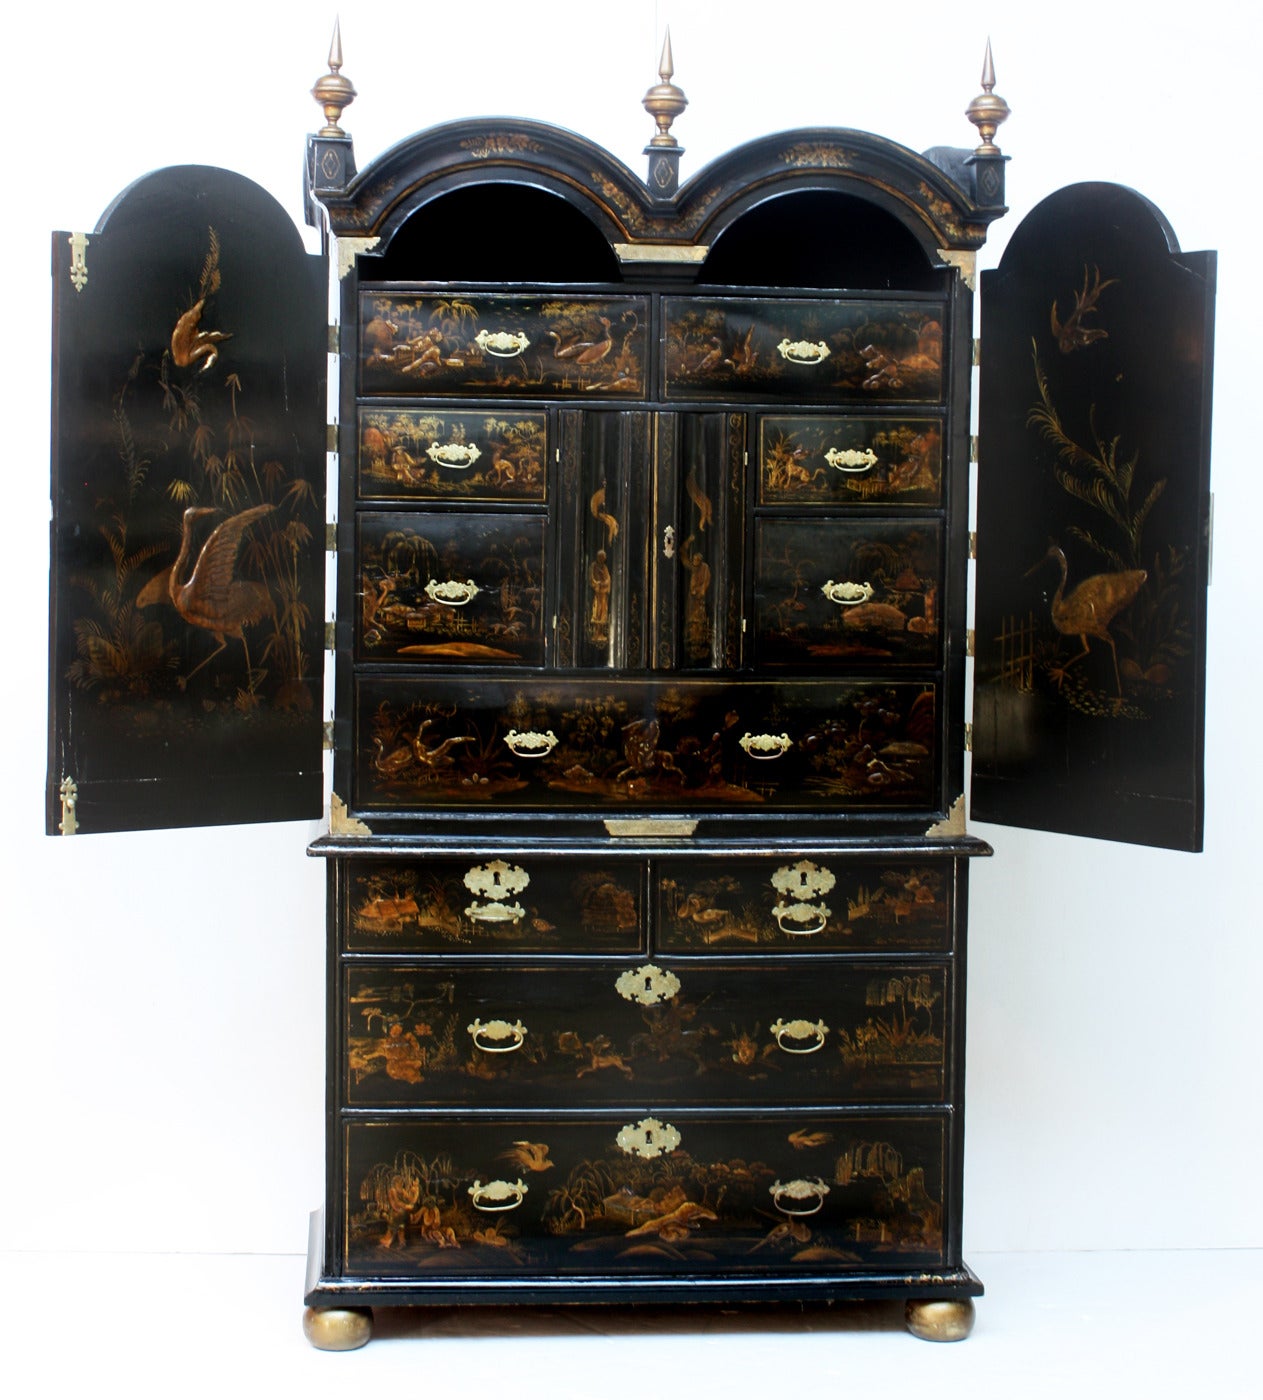 A black lacquer secretary / cabinet with double arched bonnet / top with three finials and gilt Chinoiserie decoration.The bottom section is fitted with drawers, the upper section's interior is fitted out with many drawers and specialized